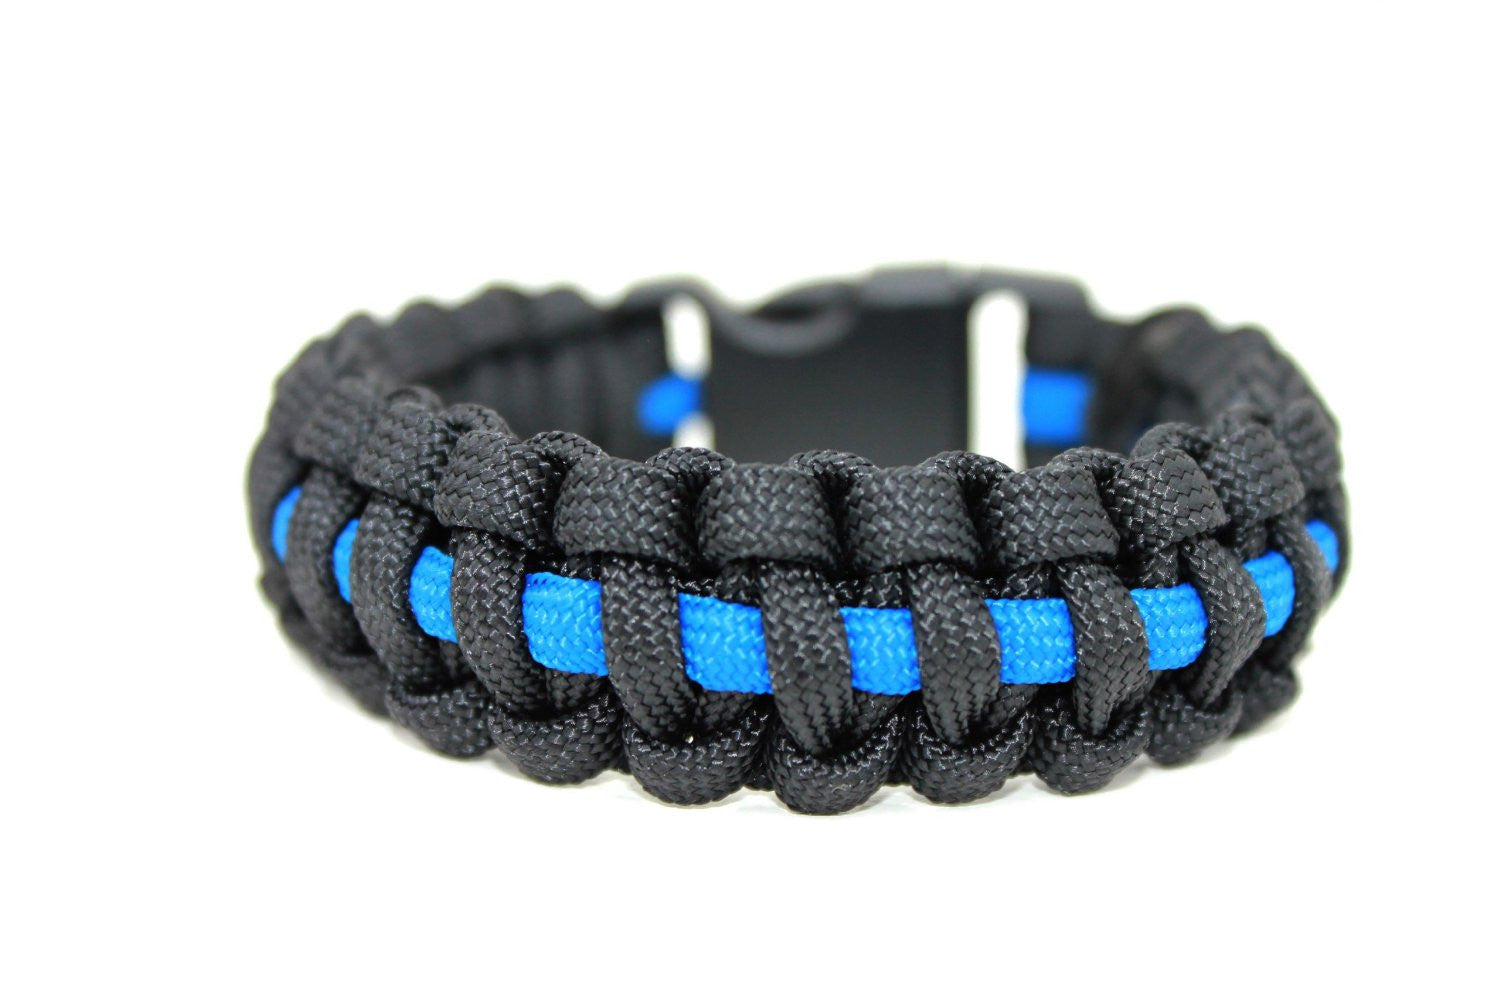 Thin Blue Line Paracord Type I ca 2 mm accessory cord